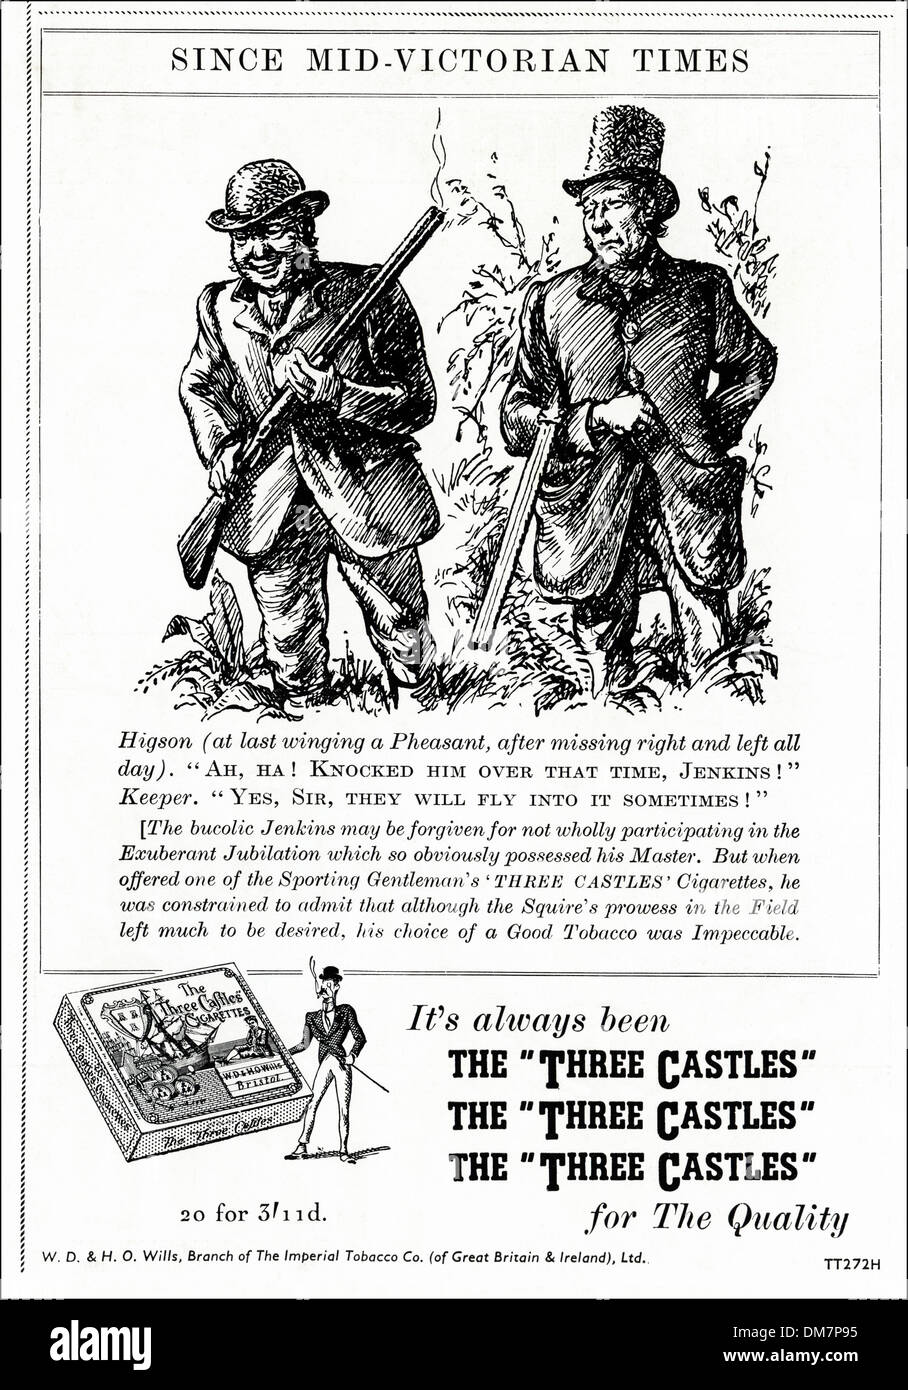 1950s advertising. Original vintage magazine advertisement advert for THE THREE CASTLES cigarettes by W.D & H.O. Wills Stock Photo